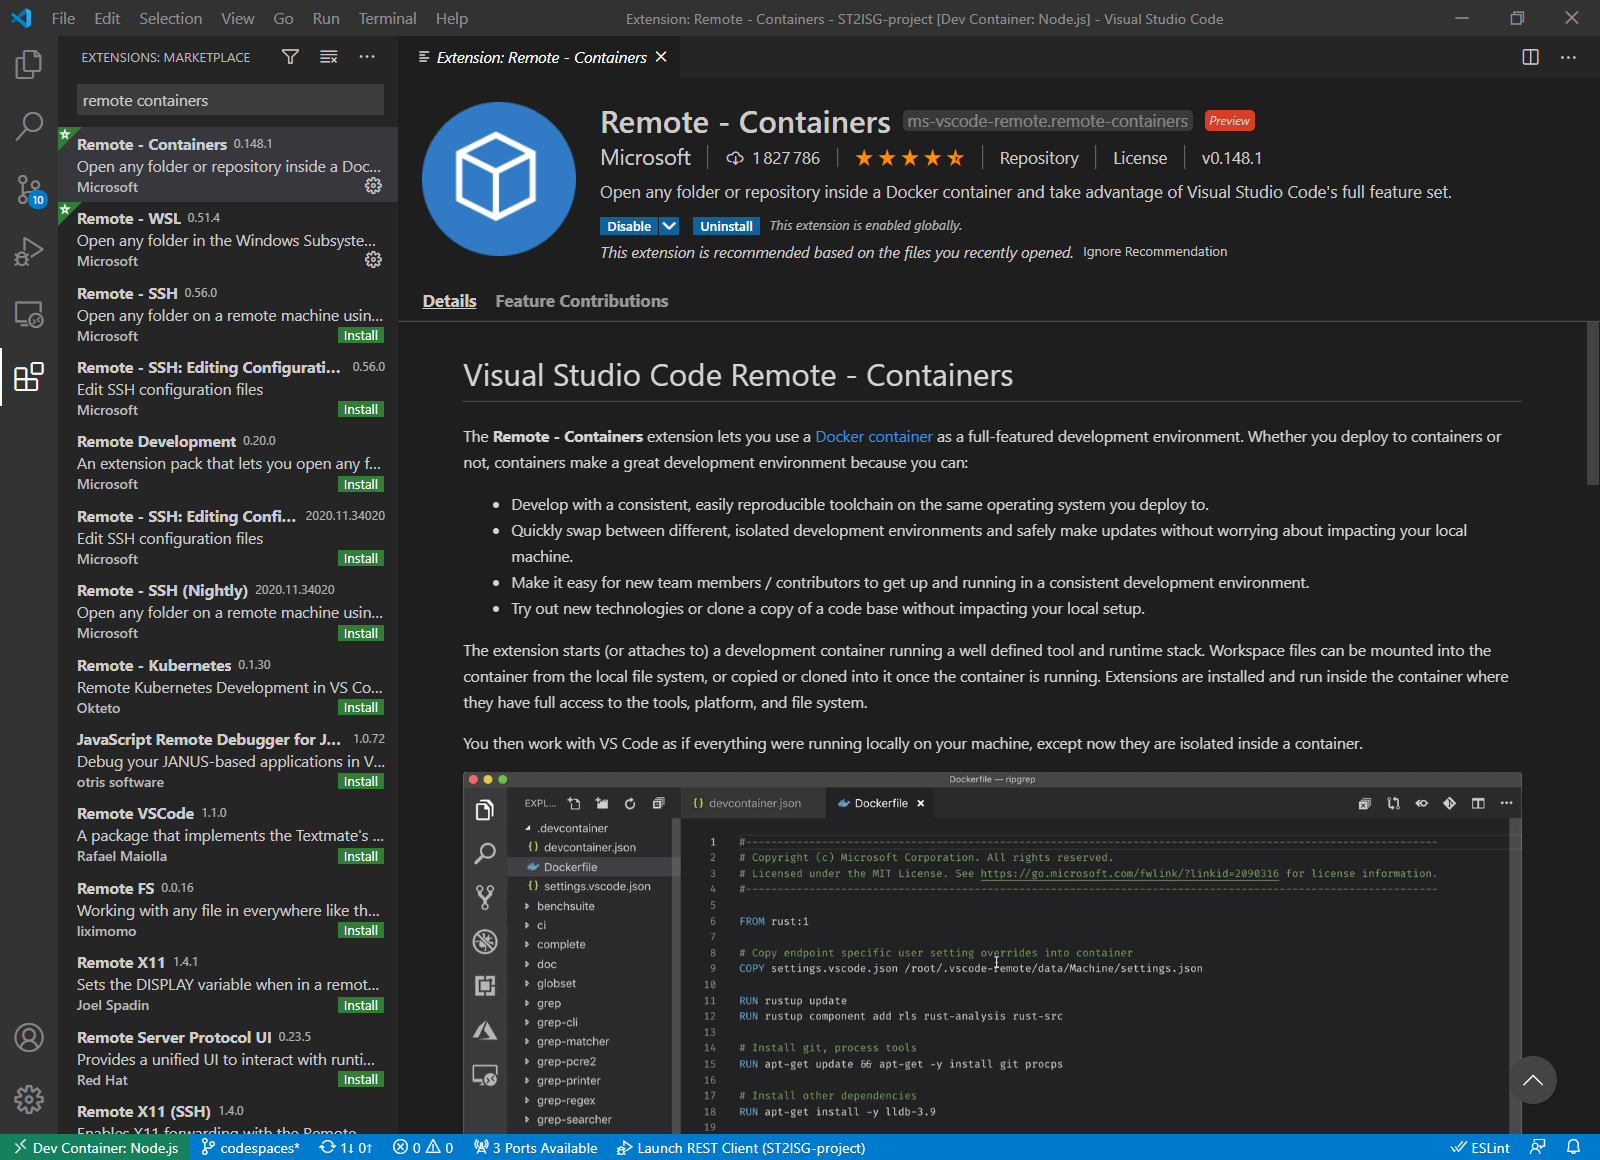 Install the Visual Studio Code Remote Containers extension